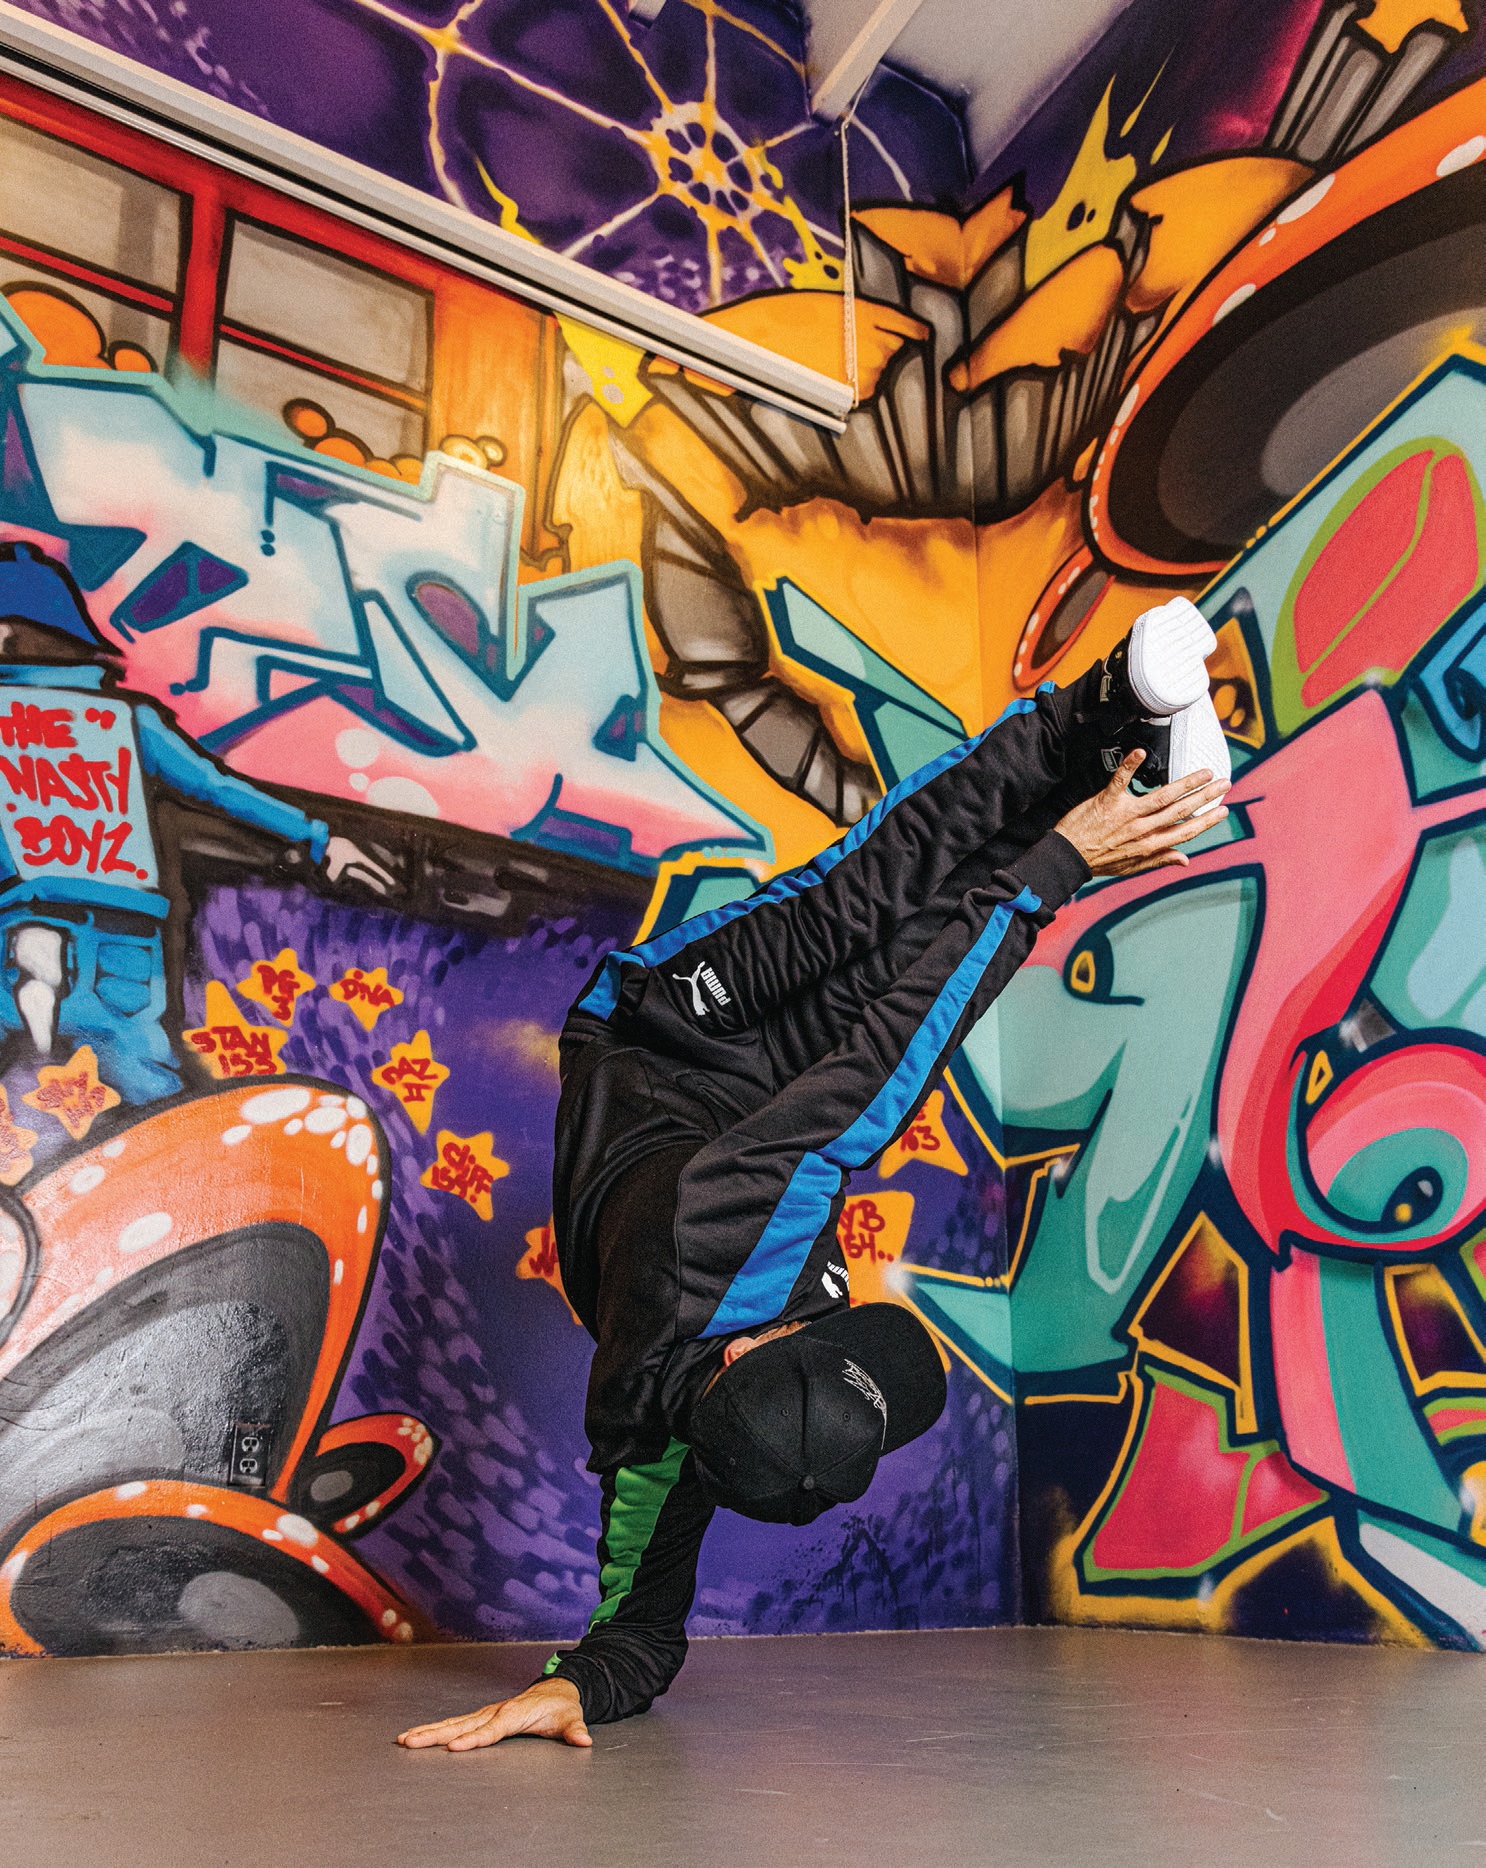 A breakdancer performs inside the museum. PHOTO COURTESY OF MUSEUM OF GRAFFITI
